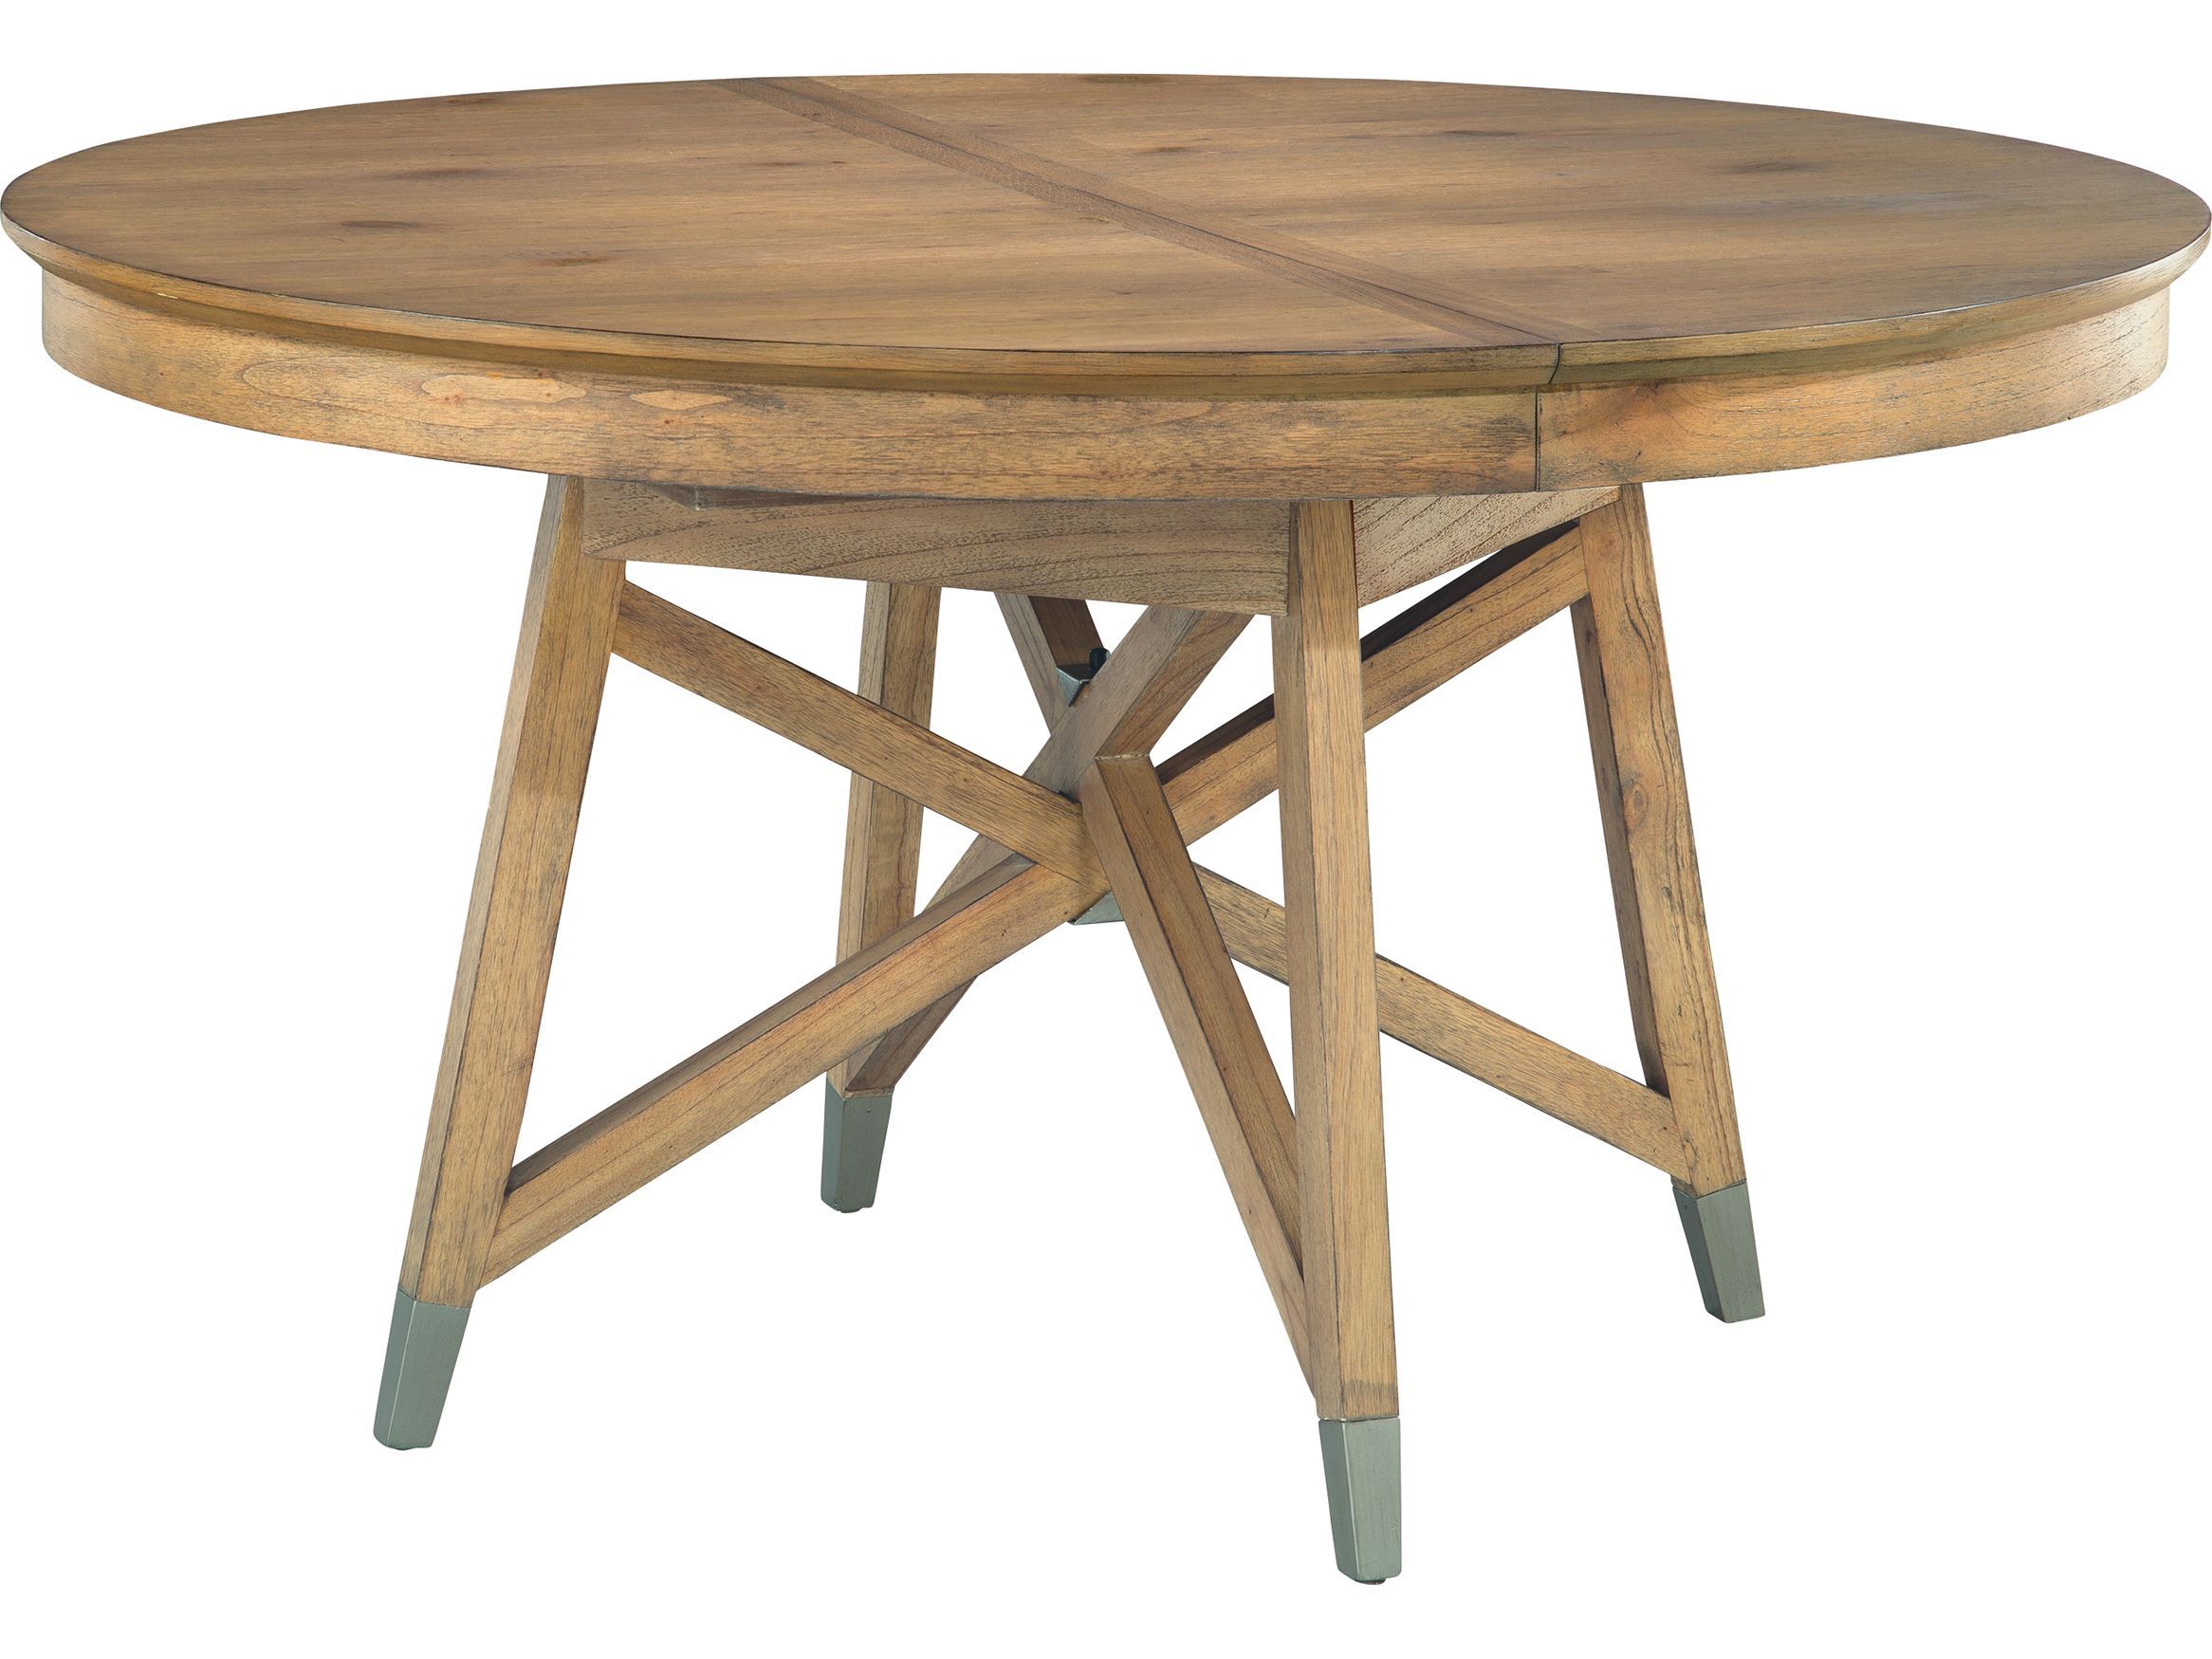 Hekman Avery Park 54'' Round Dining Table | Berwick Kitchen With Regard To Most Up To Date Avery Round Dining Tables (Photo 5 of 25)